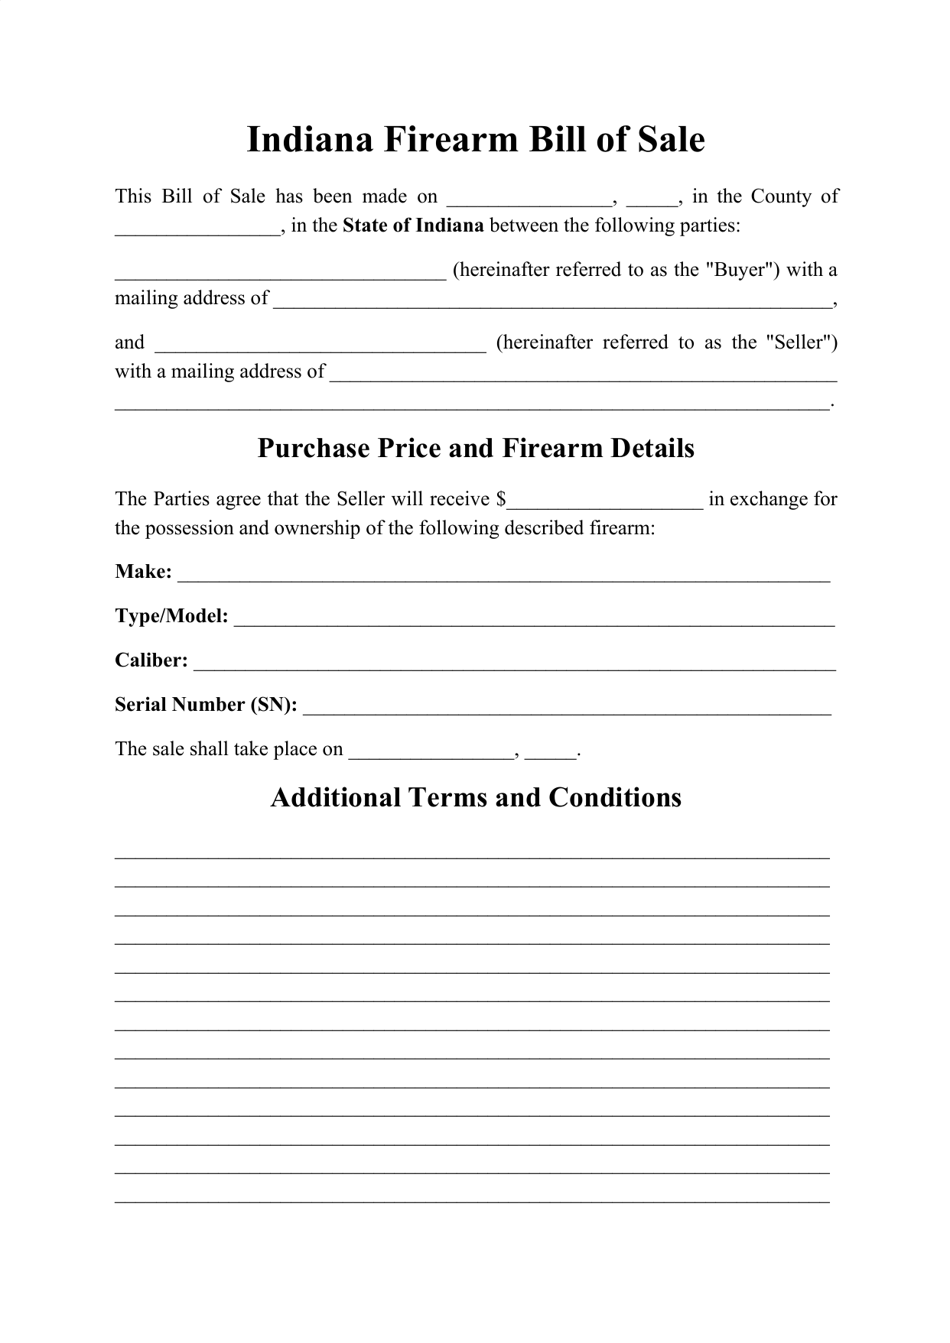 indiana-firearm-bill-of-sale-form-fill-out-sign-online-and-download